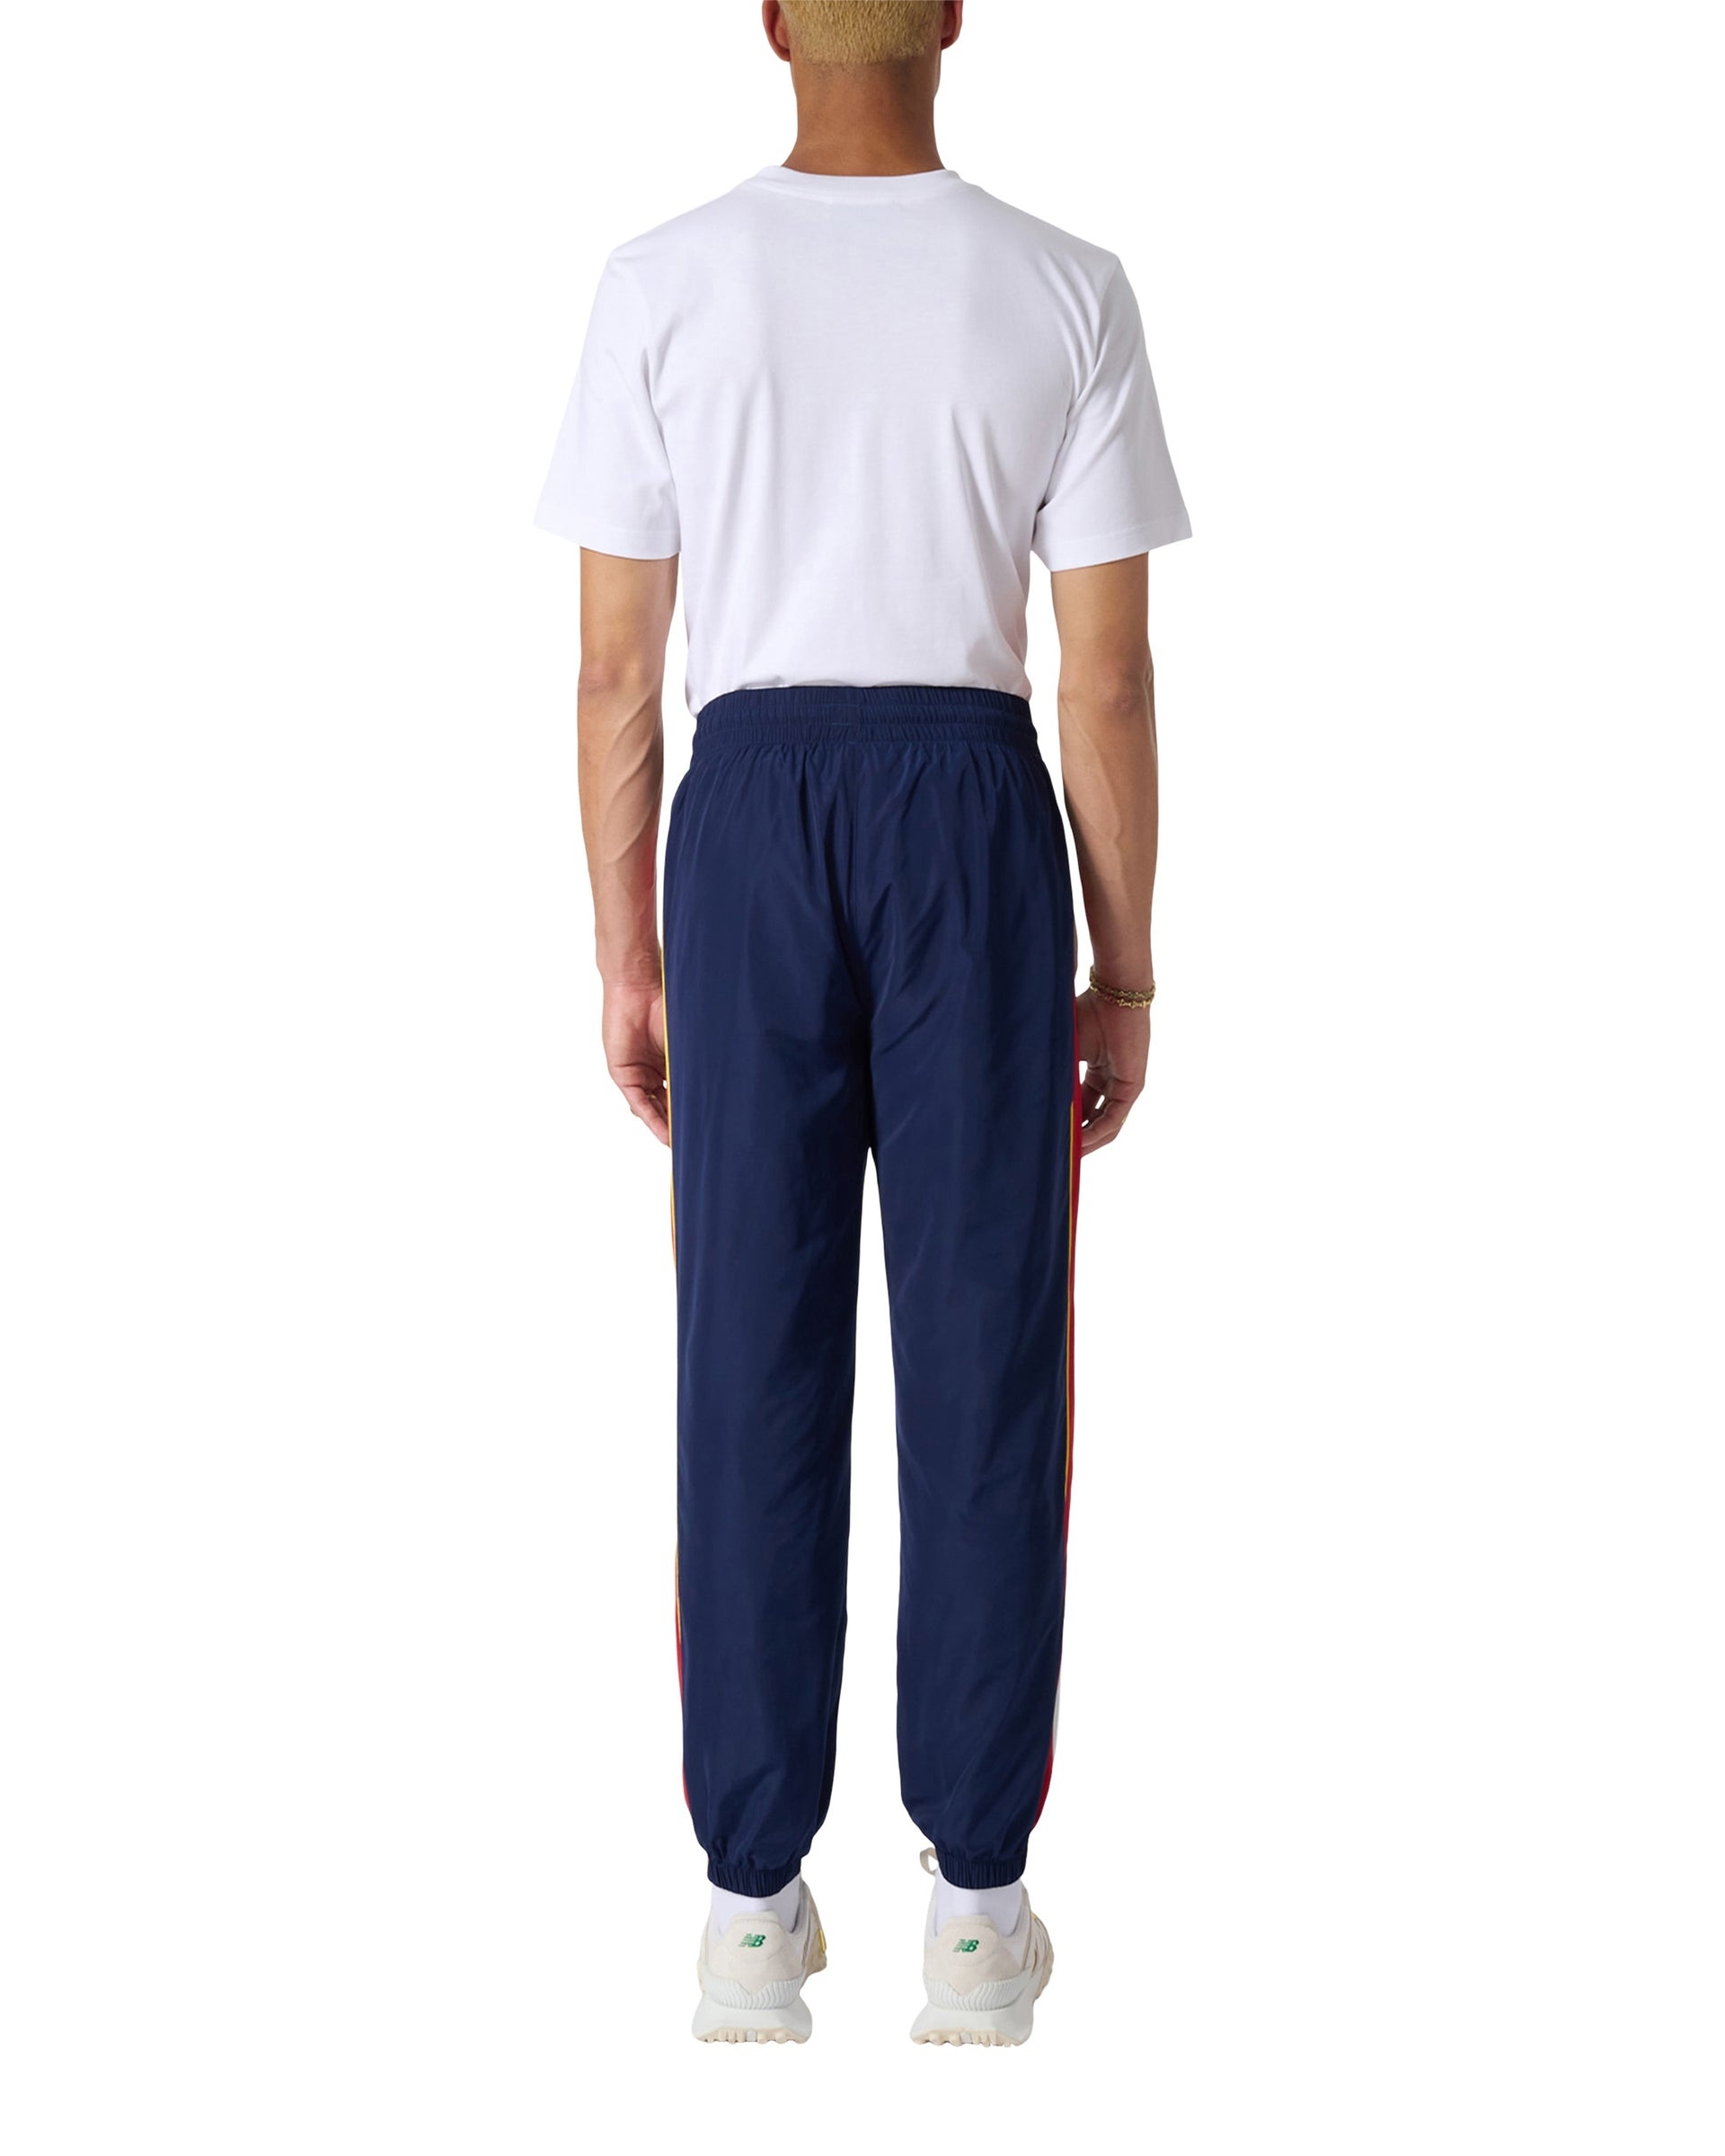 Arch Panelled Shell Suit Track Pants - 3